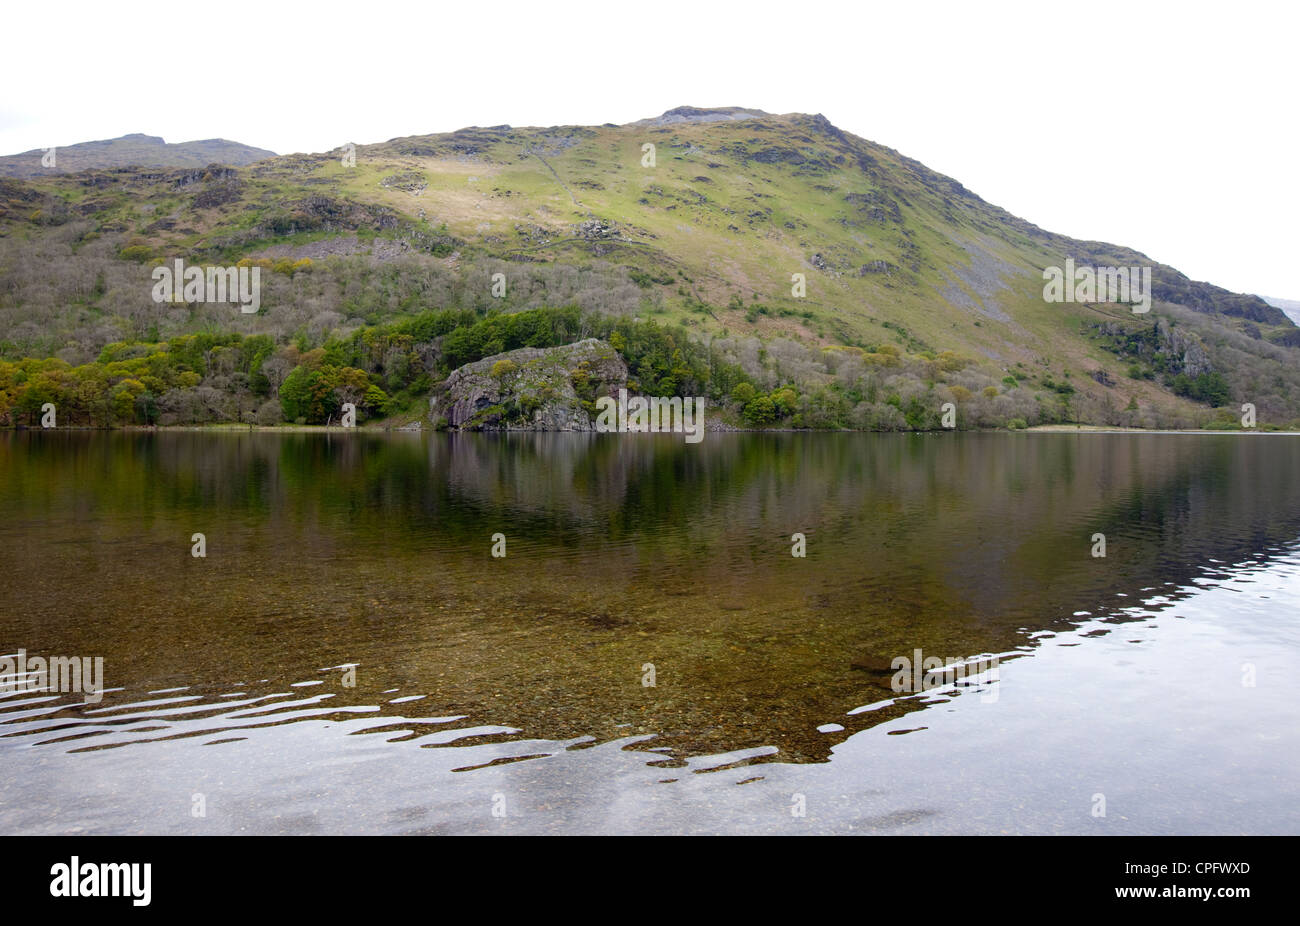 Elephant Rock On The Banks Of Llyn Gwynant In The Snowdonia National Park North Wales Stock Photo Alamy